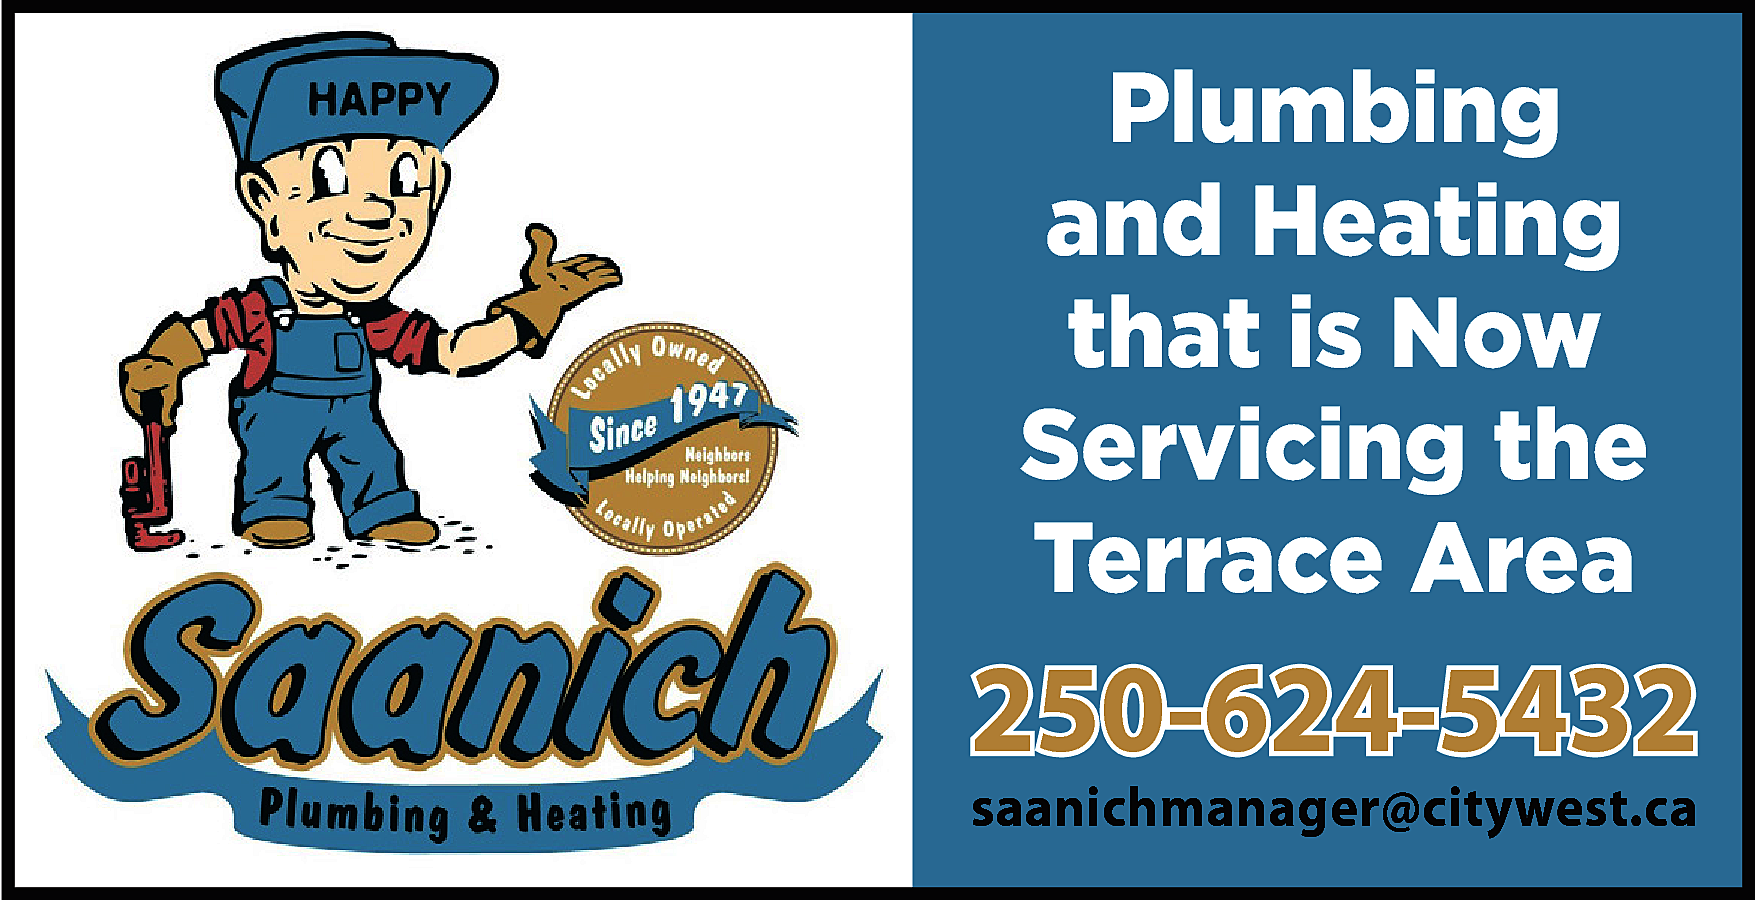 Plumbing <br>and Heating <br>that is  Plumbing  and Heating  that is Now  Servicing the  Terrace Area    250-624-5432  saanichmanager@citywest.ca    